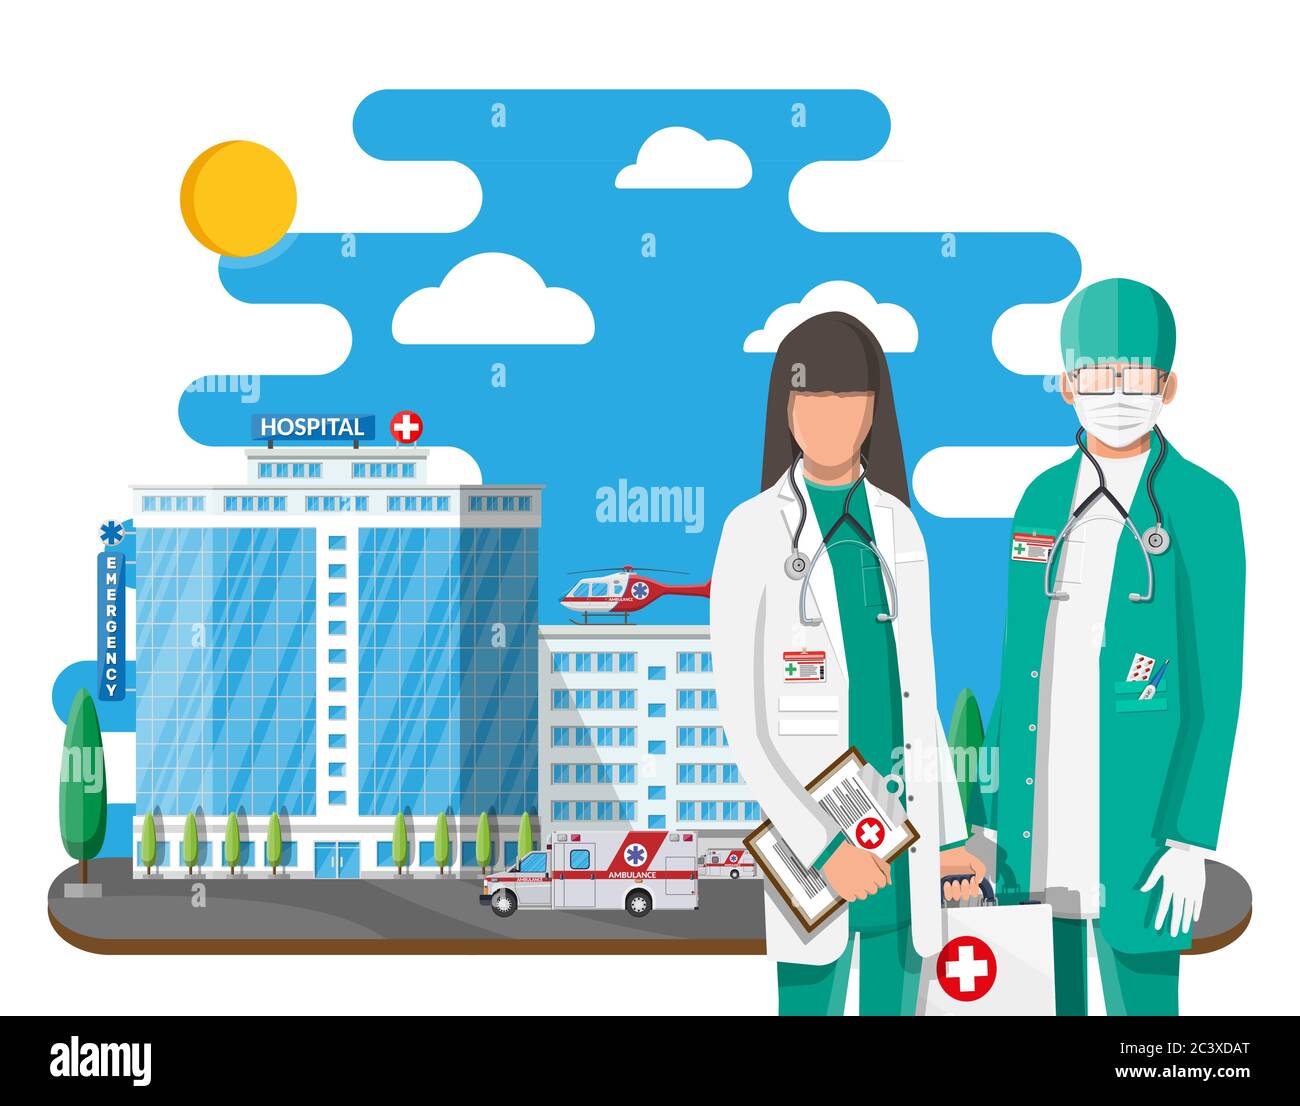 Ambulance staff concept. Hospital building, medical icon. Healthcare, hospital and medical diagnostics. Urgency and emergency services. Road, sky, tree. Car and helicopter. Flat vector illustration Stock Vector